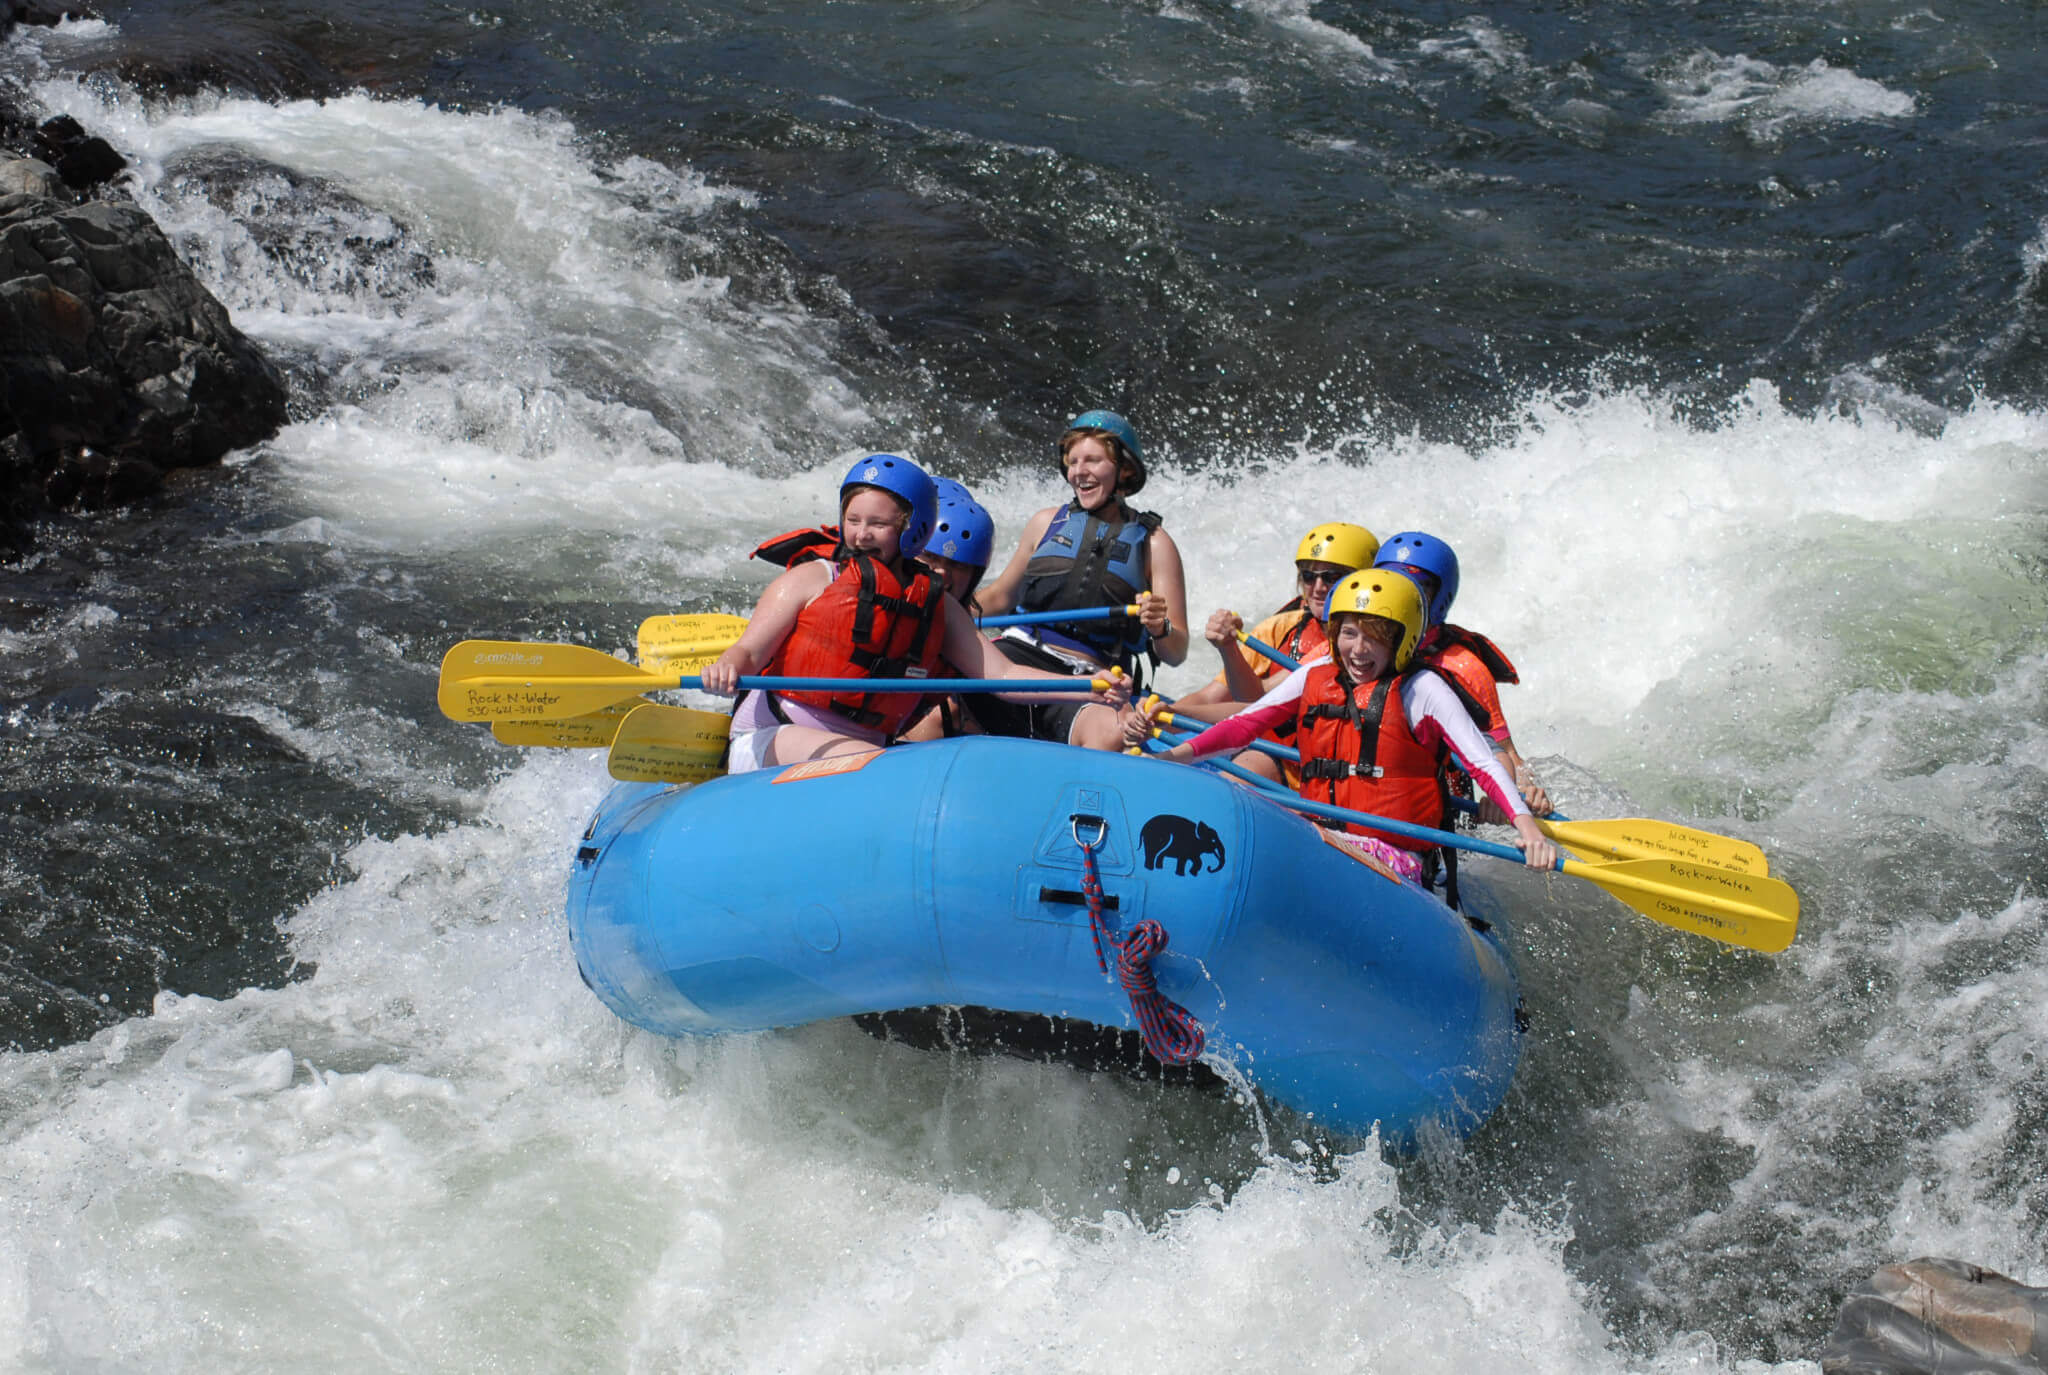 Class III River Rafting in California for Youth Groups and Families